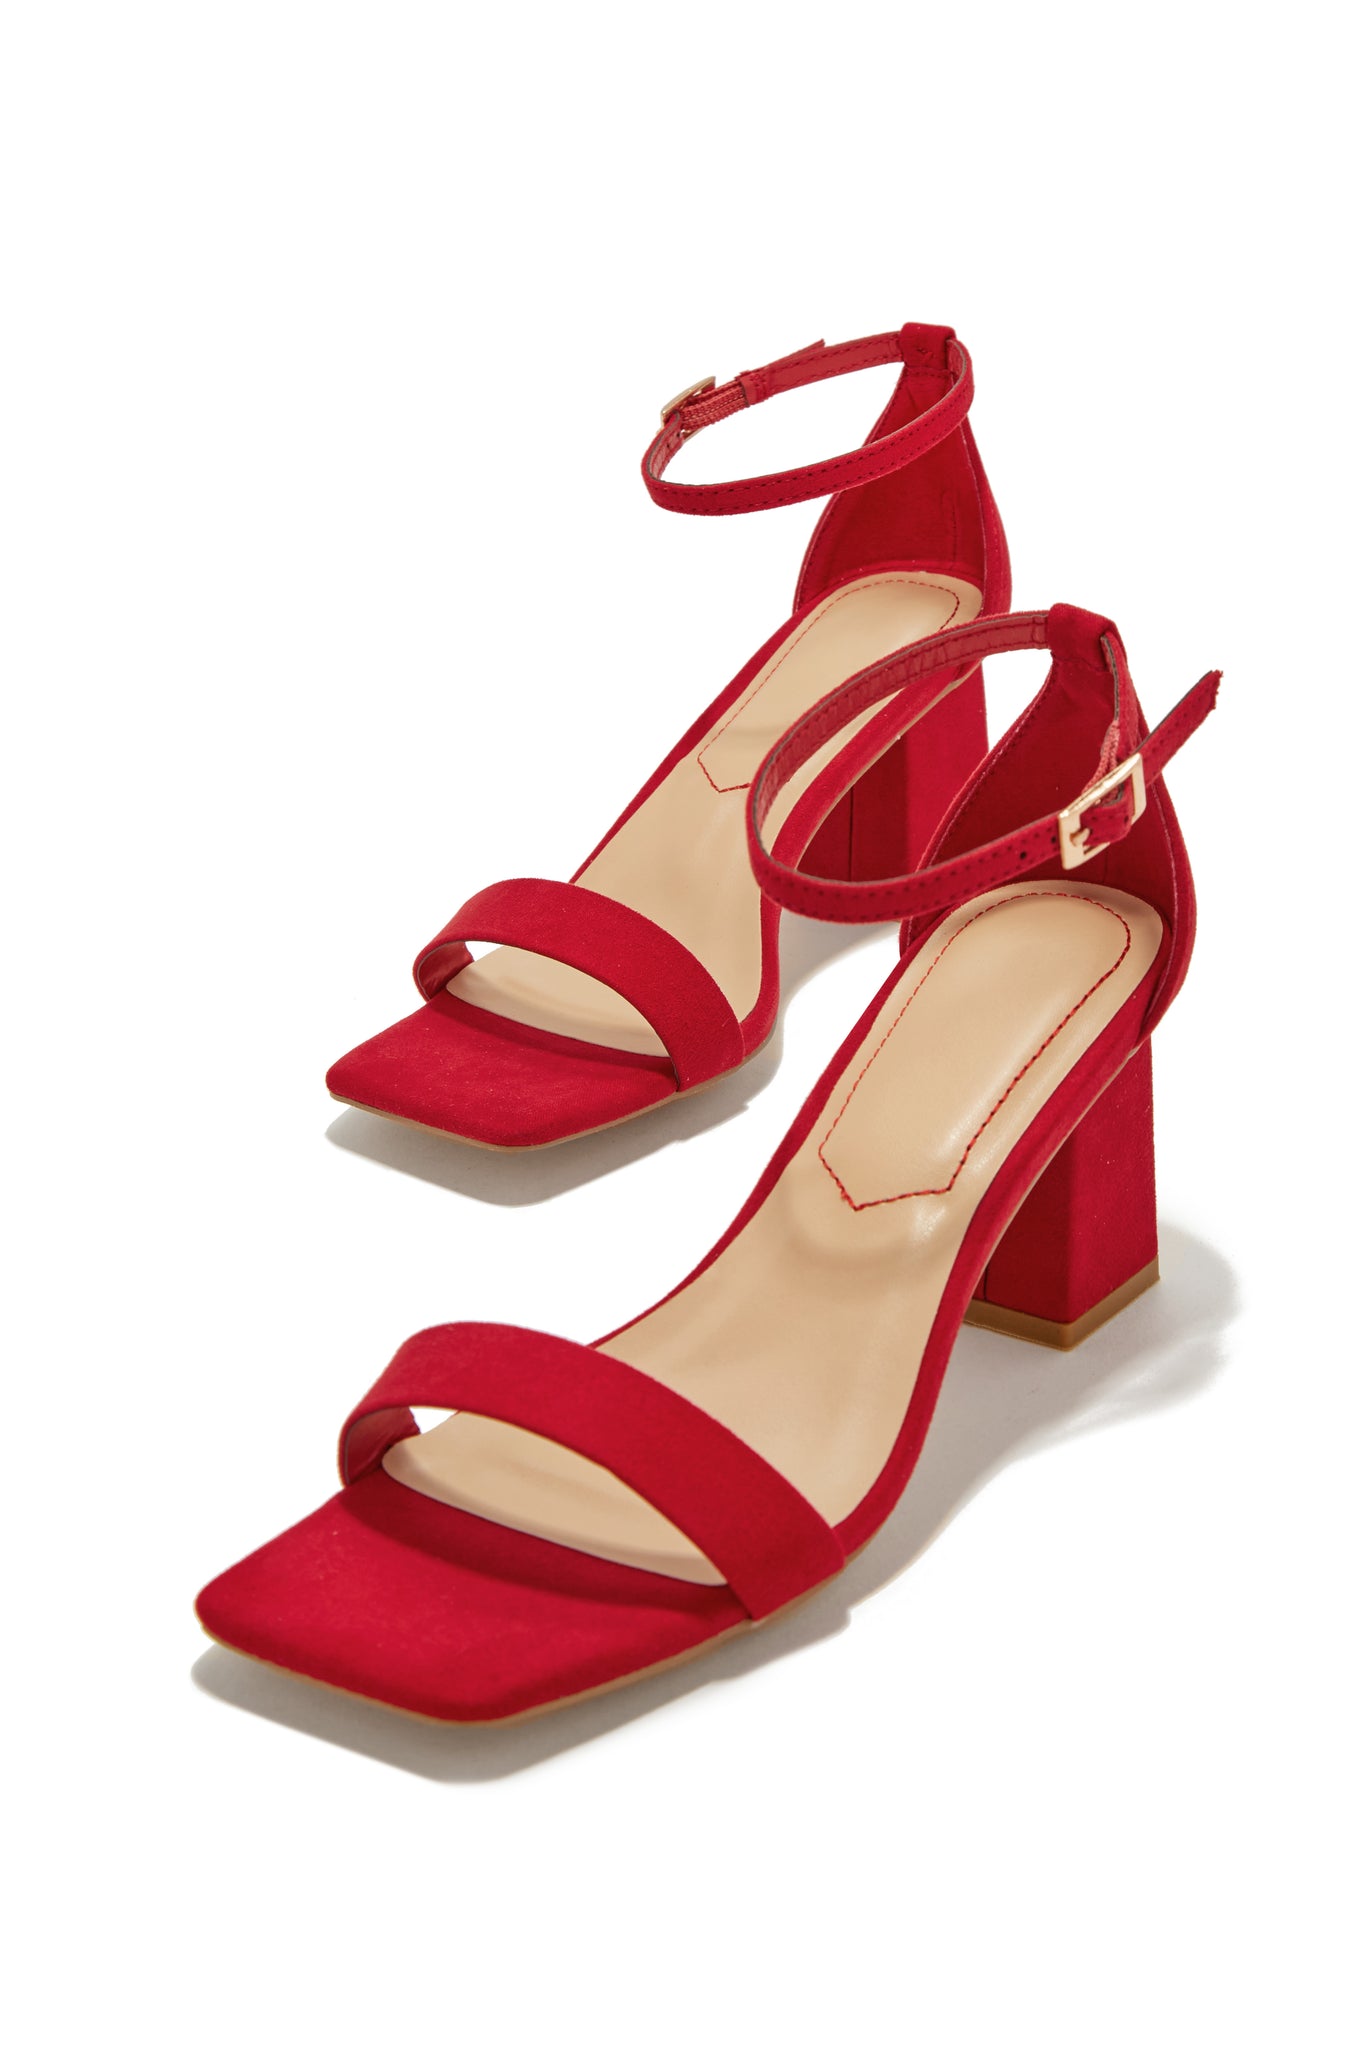 WMNS Calf Wrap Strappy Chunky High Heel Sandals - Red